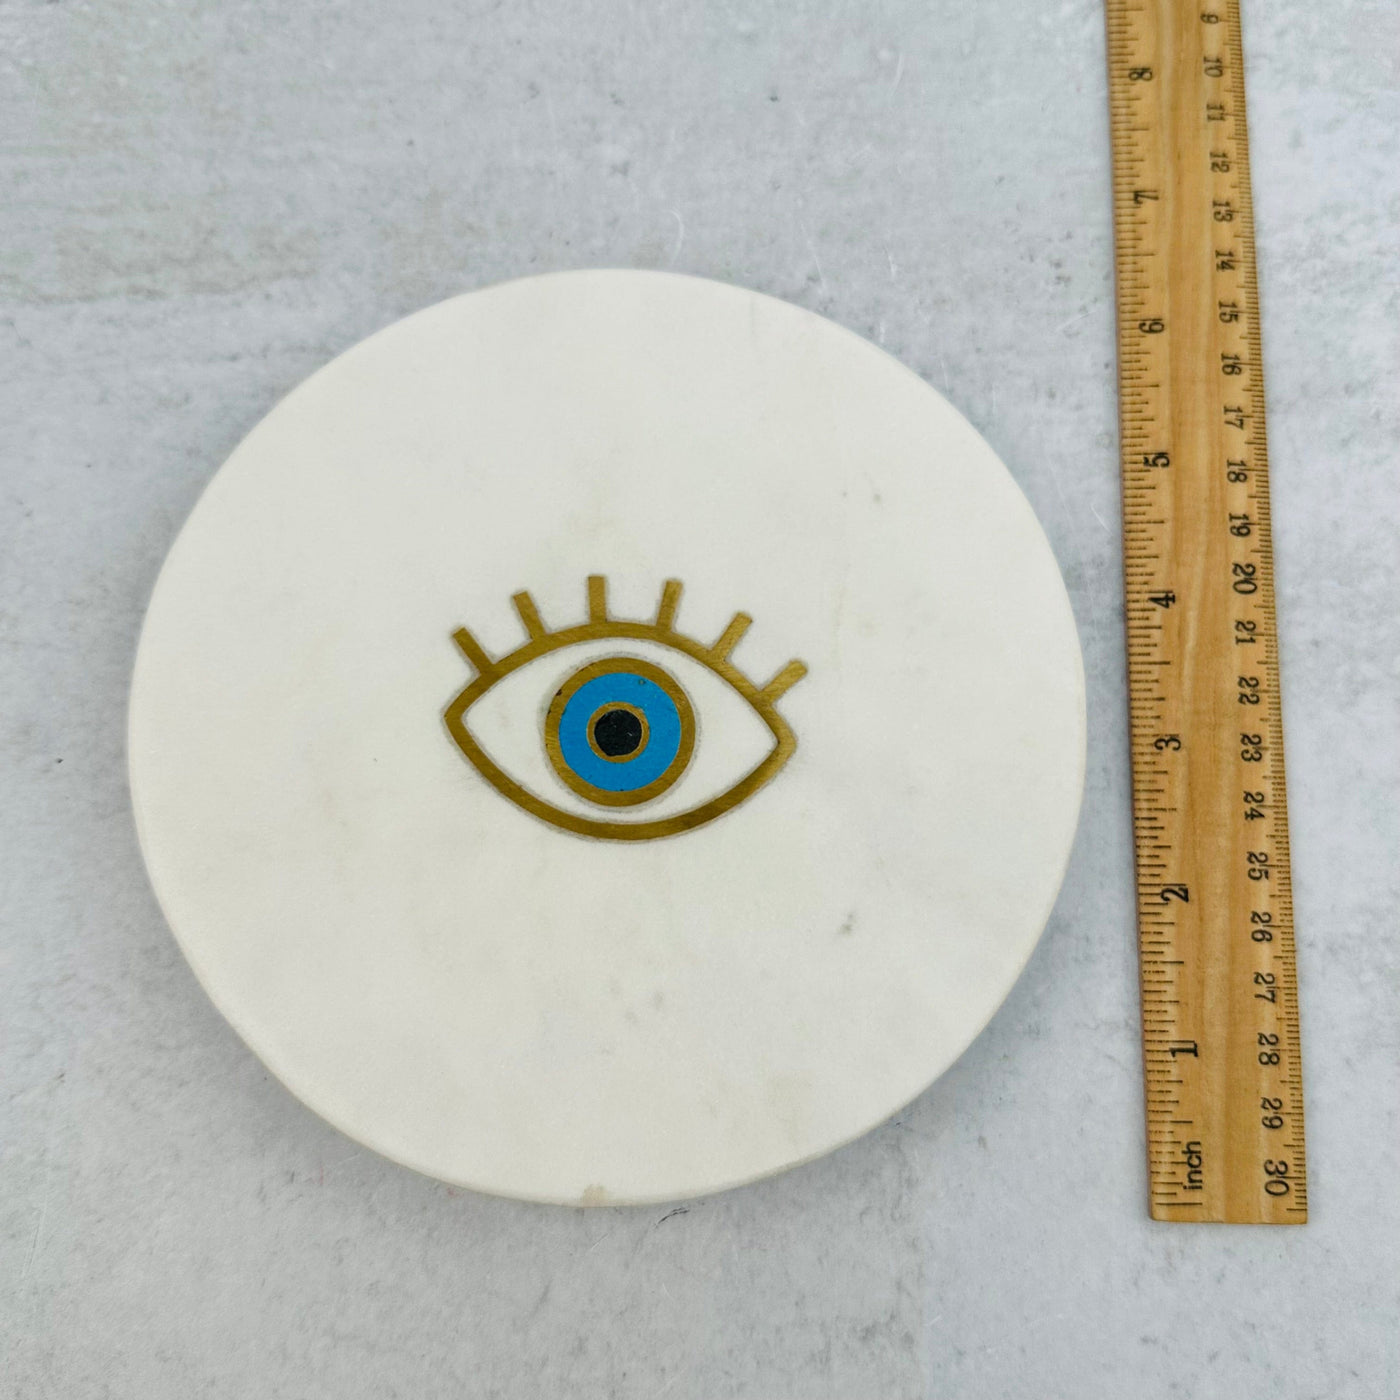 plate next to a ruler for size reference 